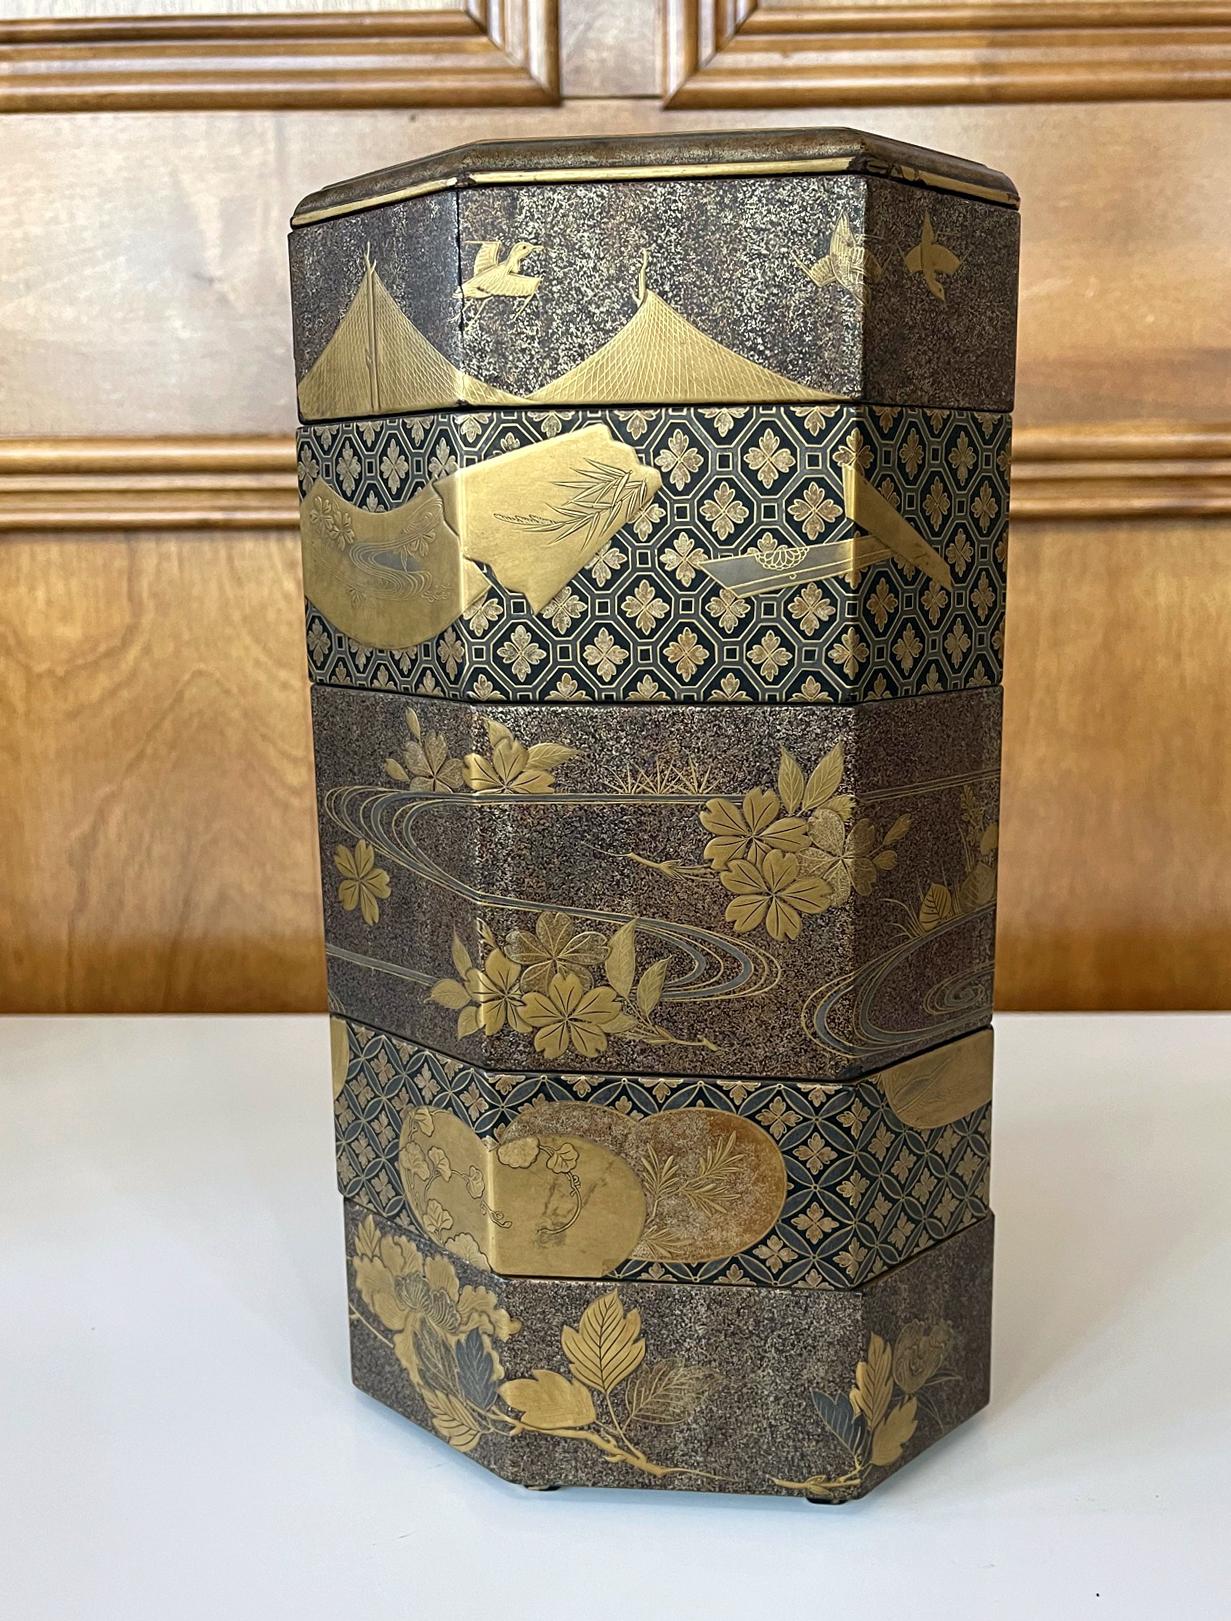 An antique jubako (stack boxes) with five tiers in an elongated octagon shape circa 19th century (end of Edo or beginning of Meiji period). jubako was traditionally used to store and carry foods in Edo time, often as part of the accoutrement with a